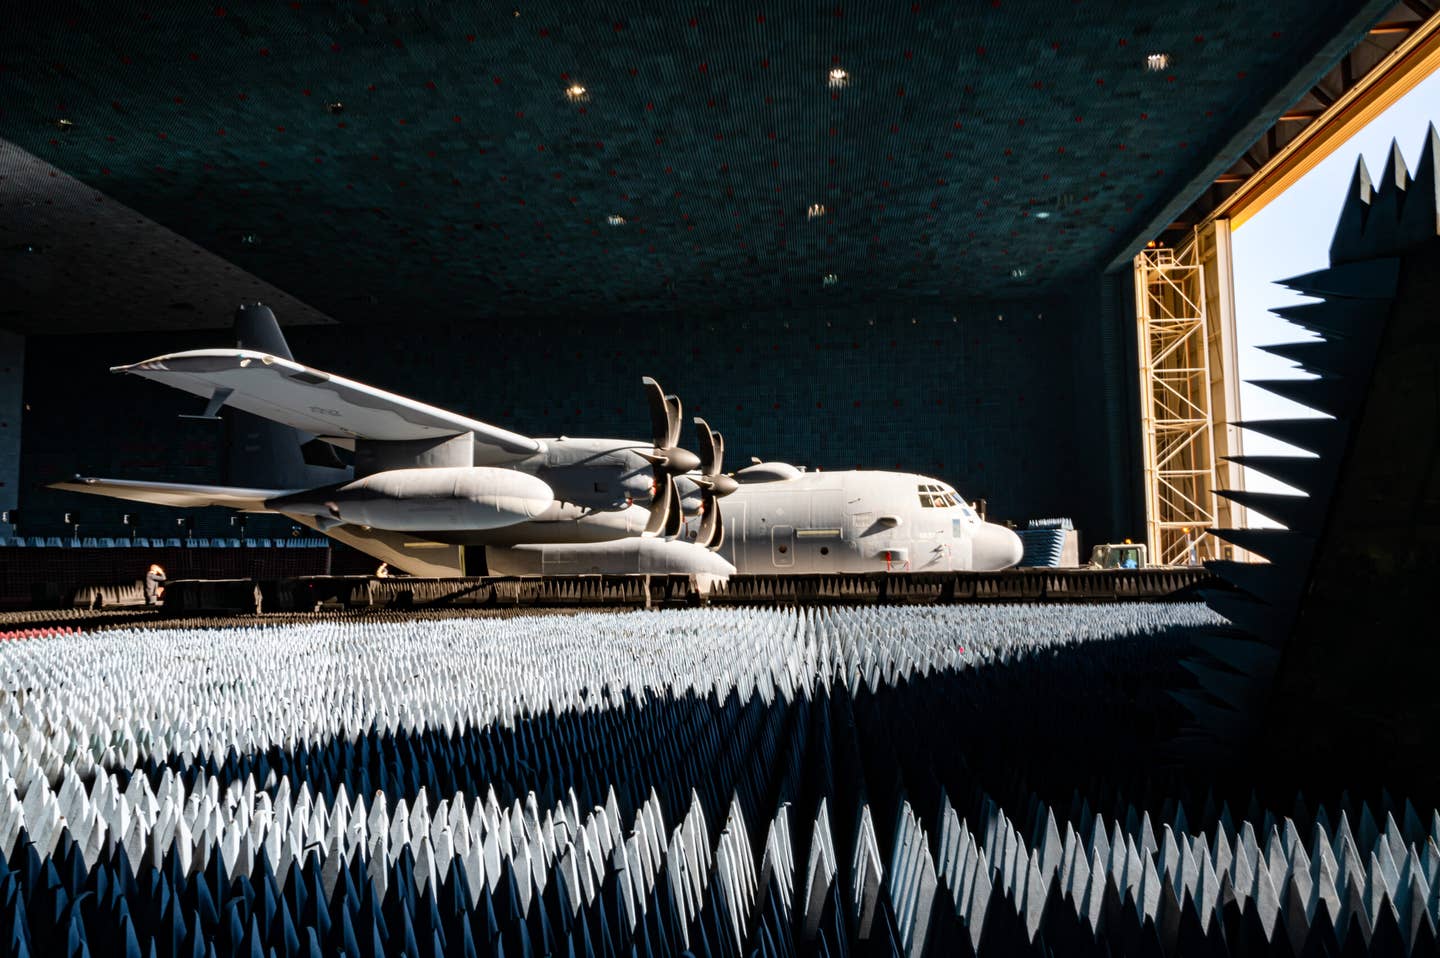 An AC-130J in the anechoic chamber at Edwards AFB. (USAF)